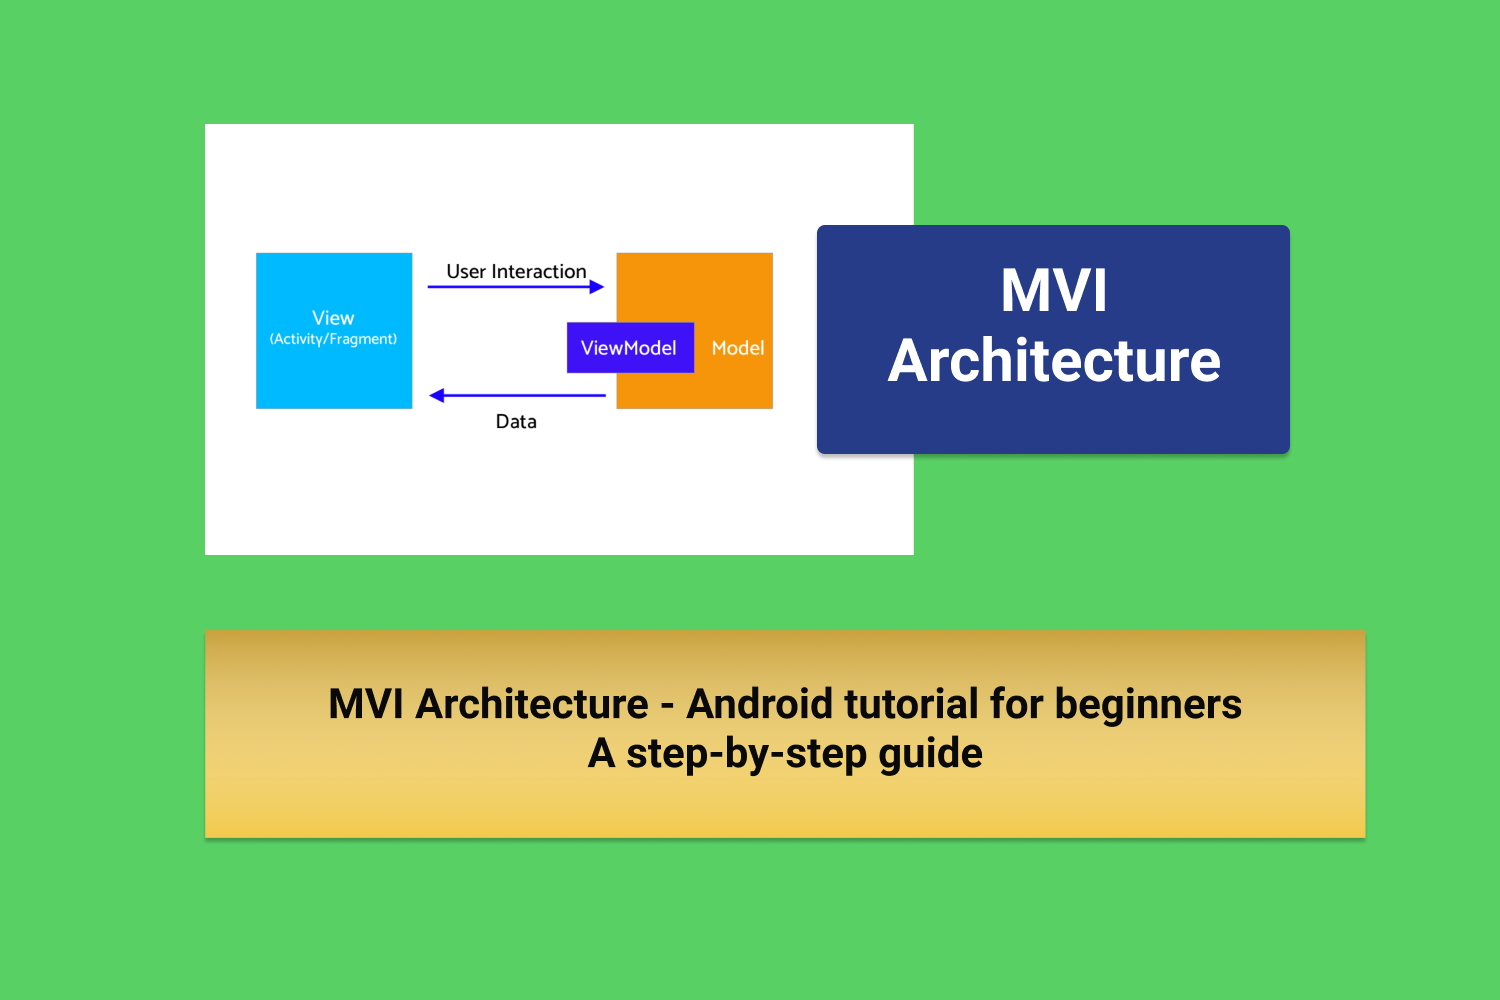 MVI Architecture - Android Tutorial for Beginners - Step By Step Guide